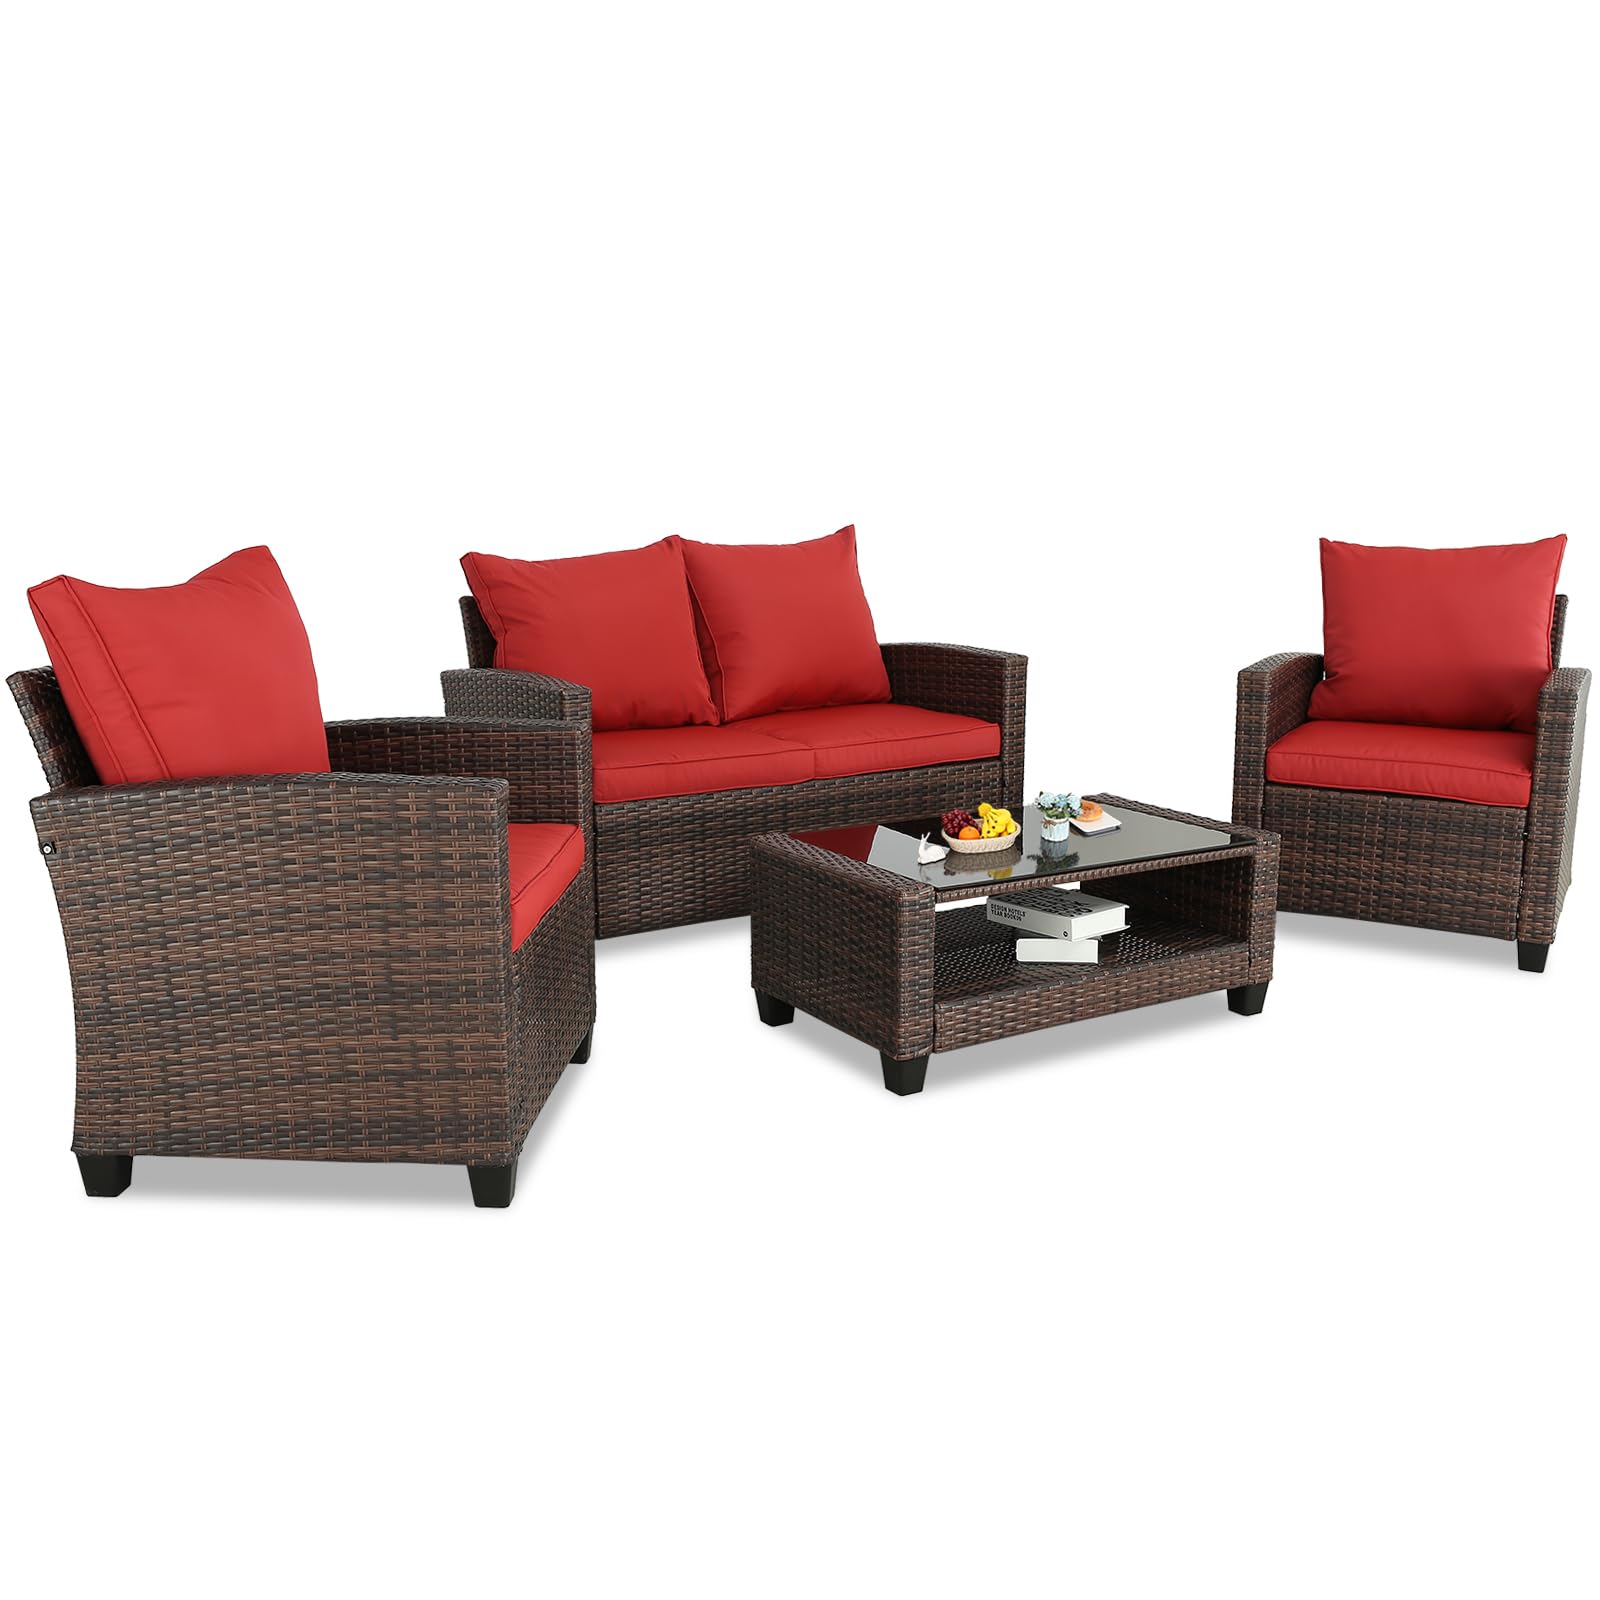 4 Pieces Patio Furniture Sets Outdoor Sectional Wicker Set Outdoor Conversation Set